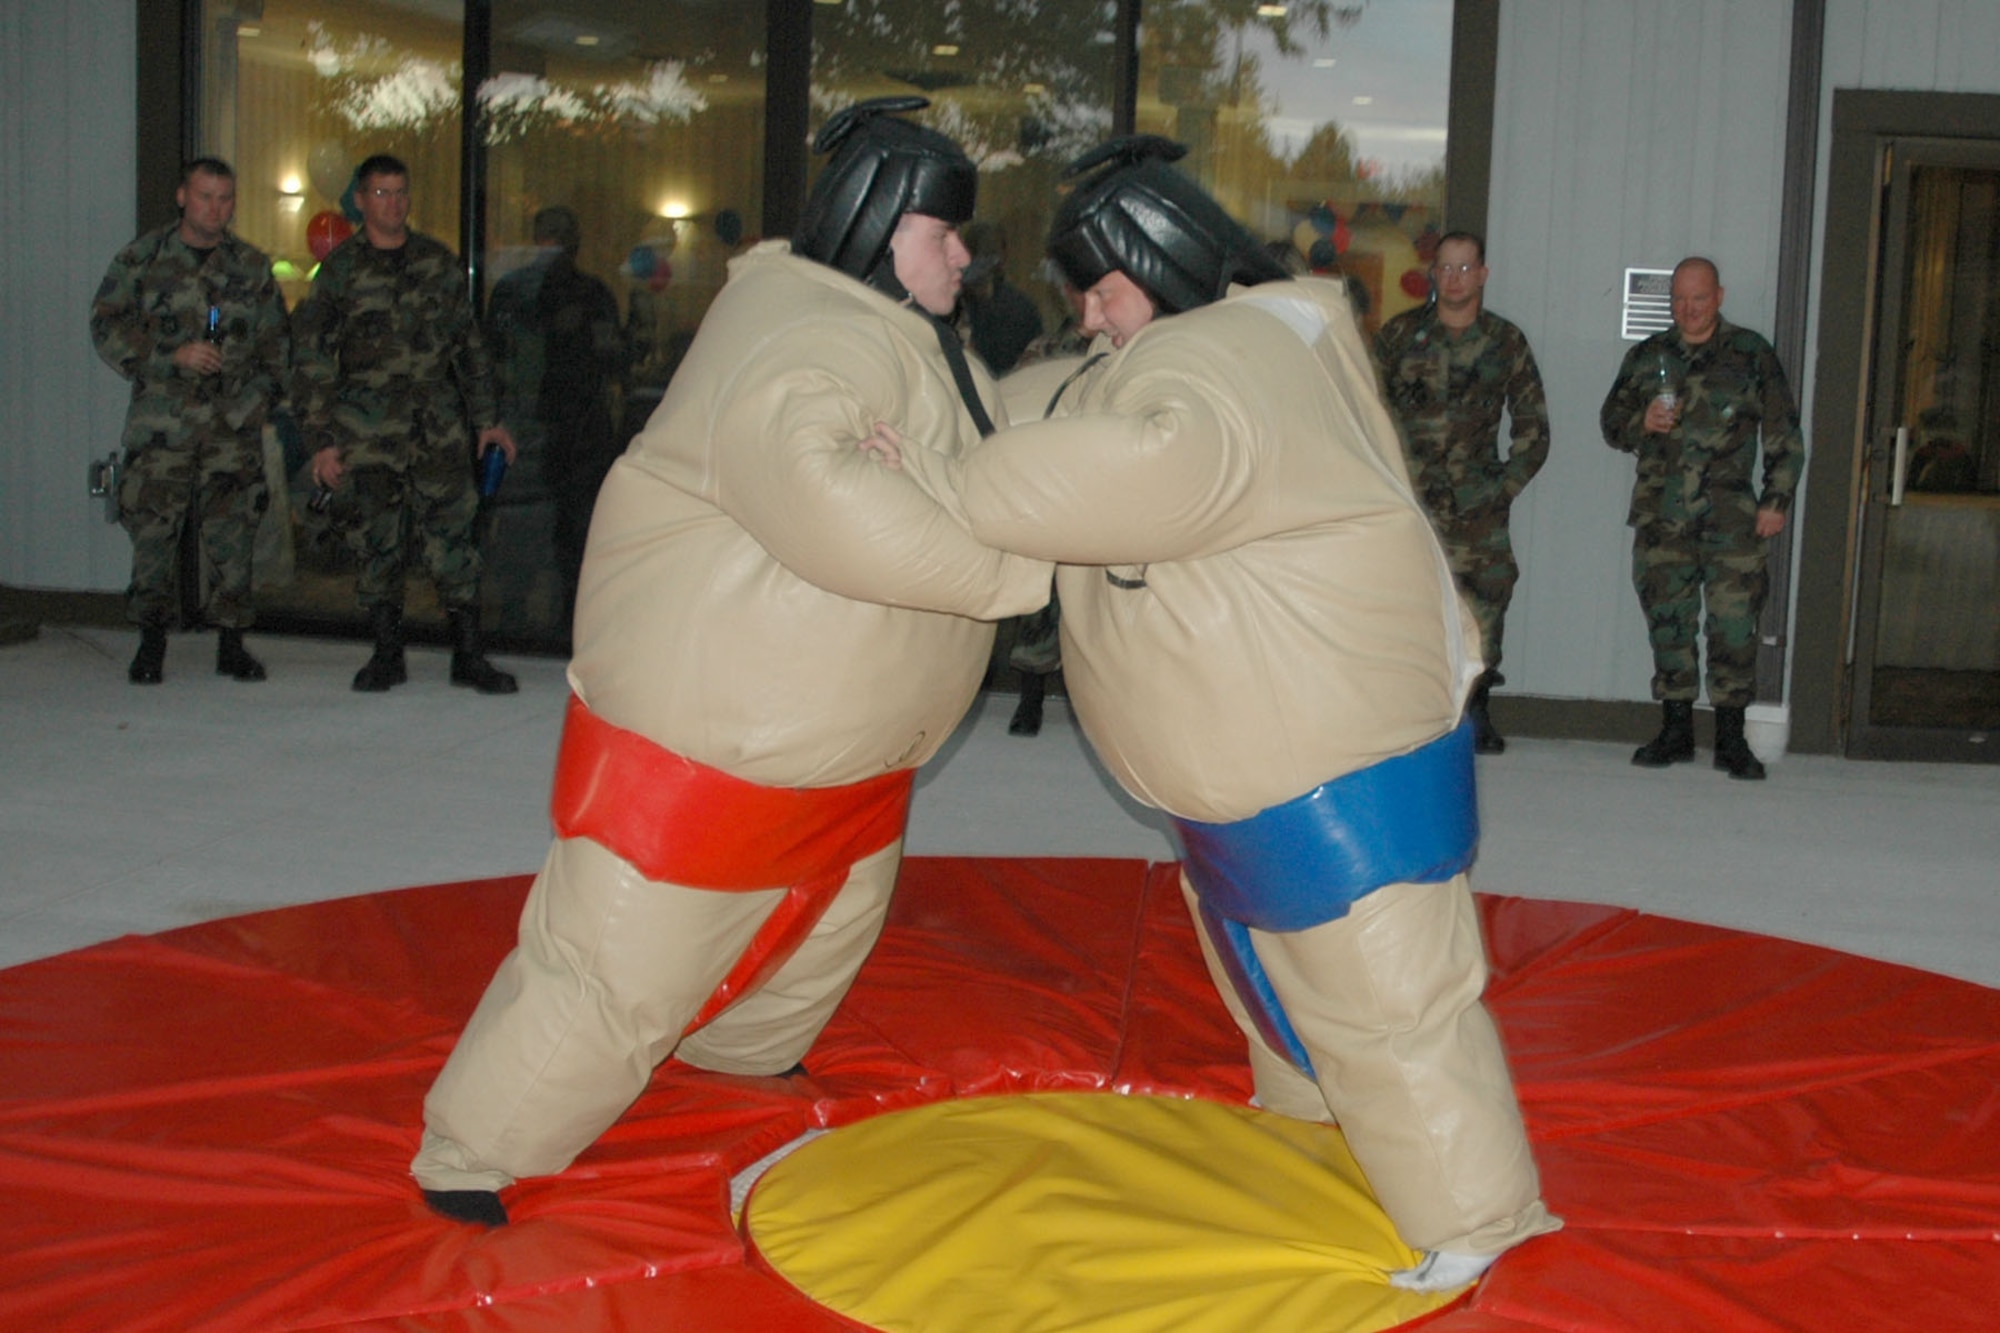 YOUNGSTOWN AIR RESERVE STATION, Ohio — A group of Air Force Reservists assigned to the 910th Airlift Wing participate in some Sumo-style fun under the canopy just outside the Eagle's Nest Club here during the facility's Grand Re-Opening celebration .U.S. Air Force photo/ Tech. Sgt. Bob Barko Jr.